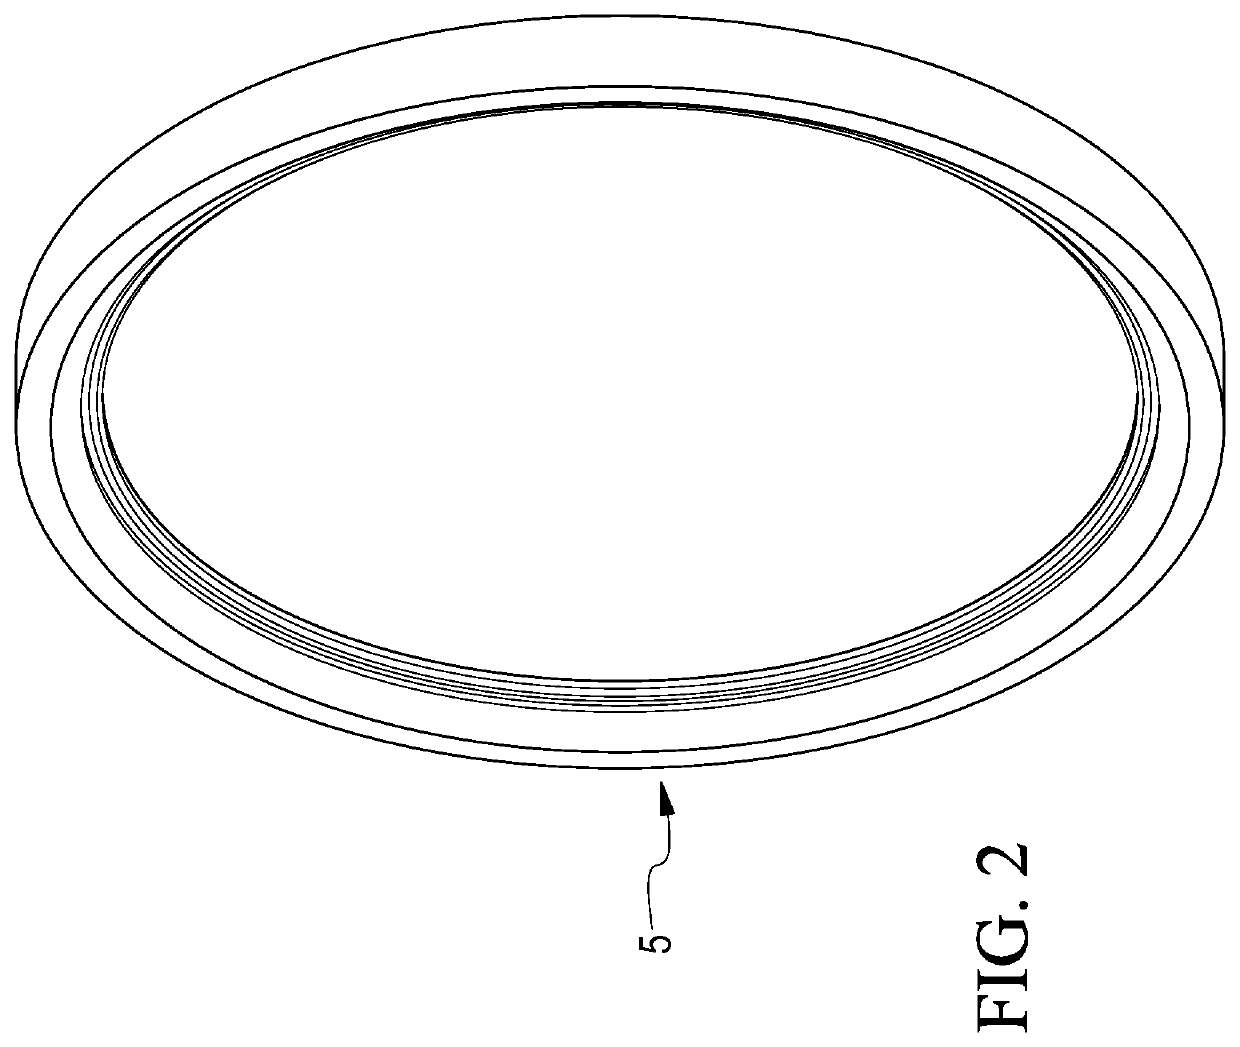 Method of manufacturing bell socketed plastic pipes